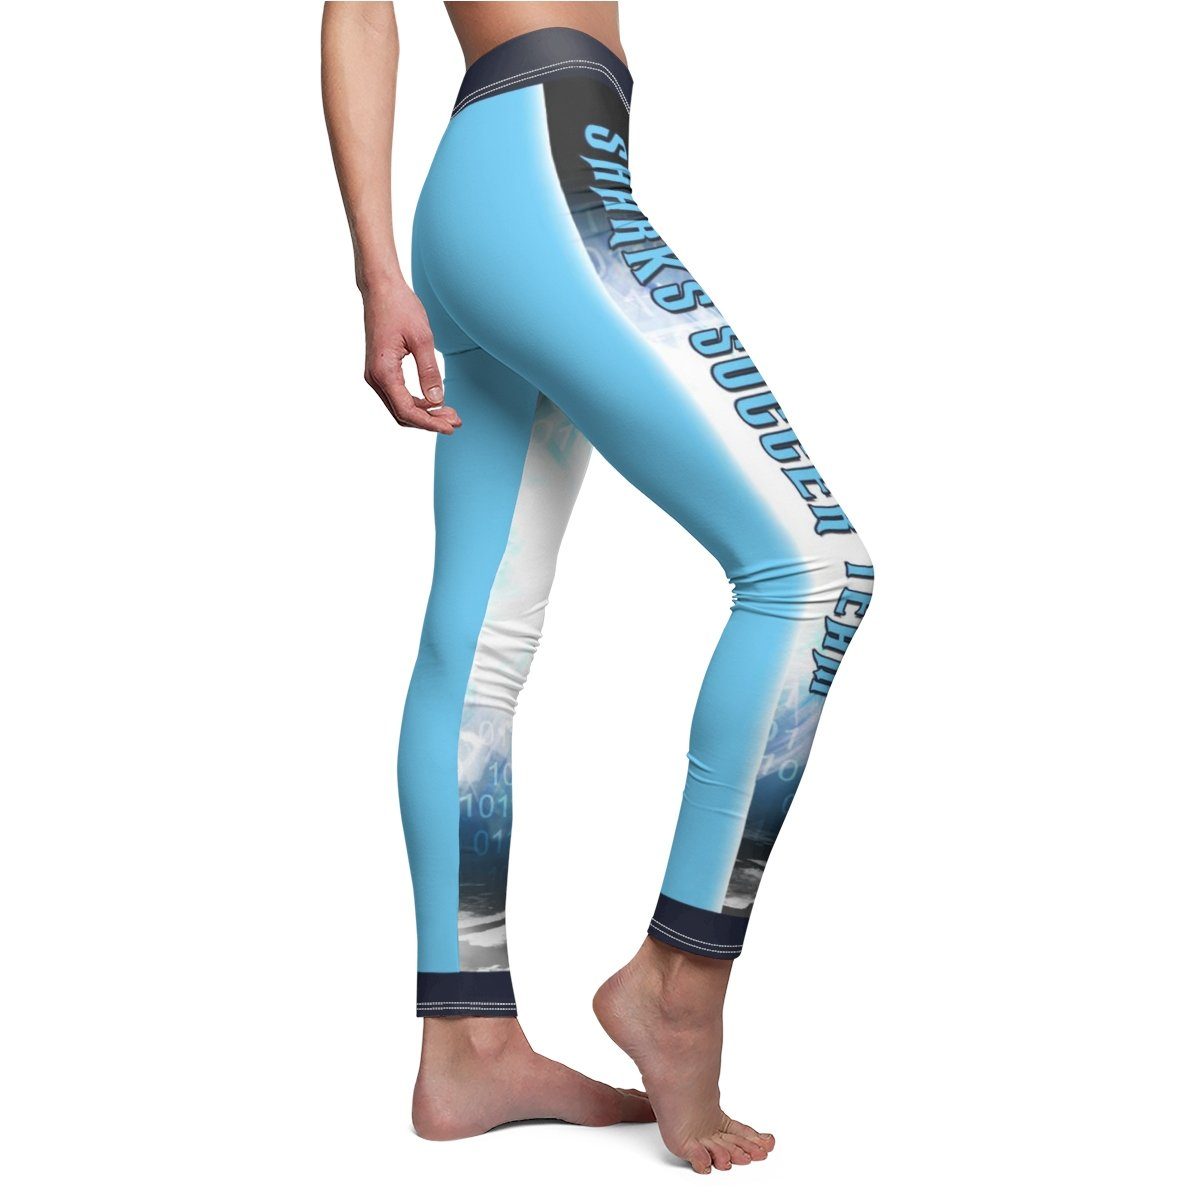 Time Zone - V.5 - Extreme Sportswear Cut & Sew Leggings Template-Photoshop Template - Photo Solutions